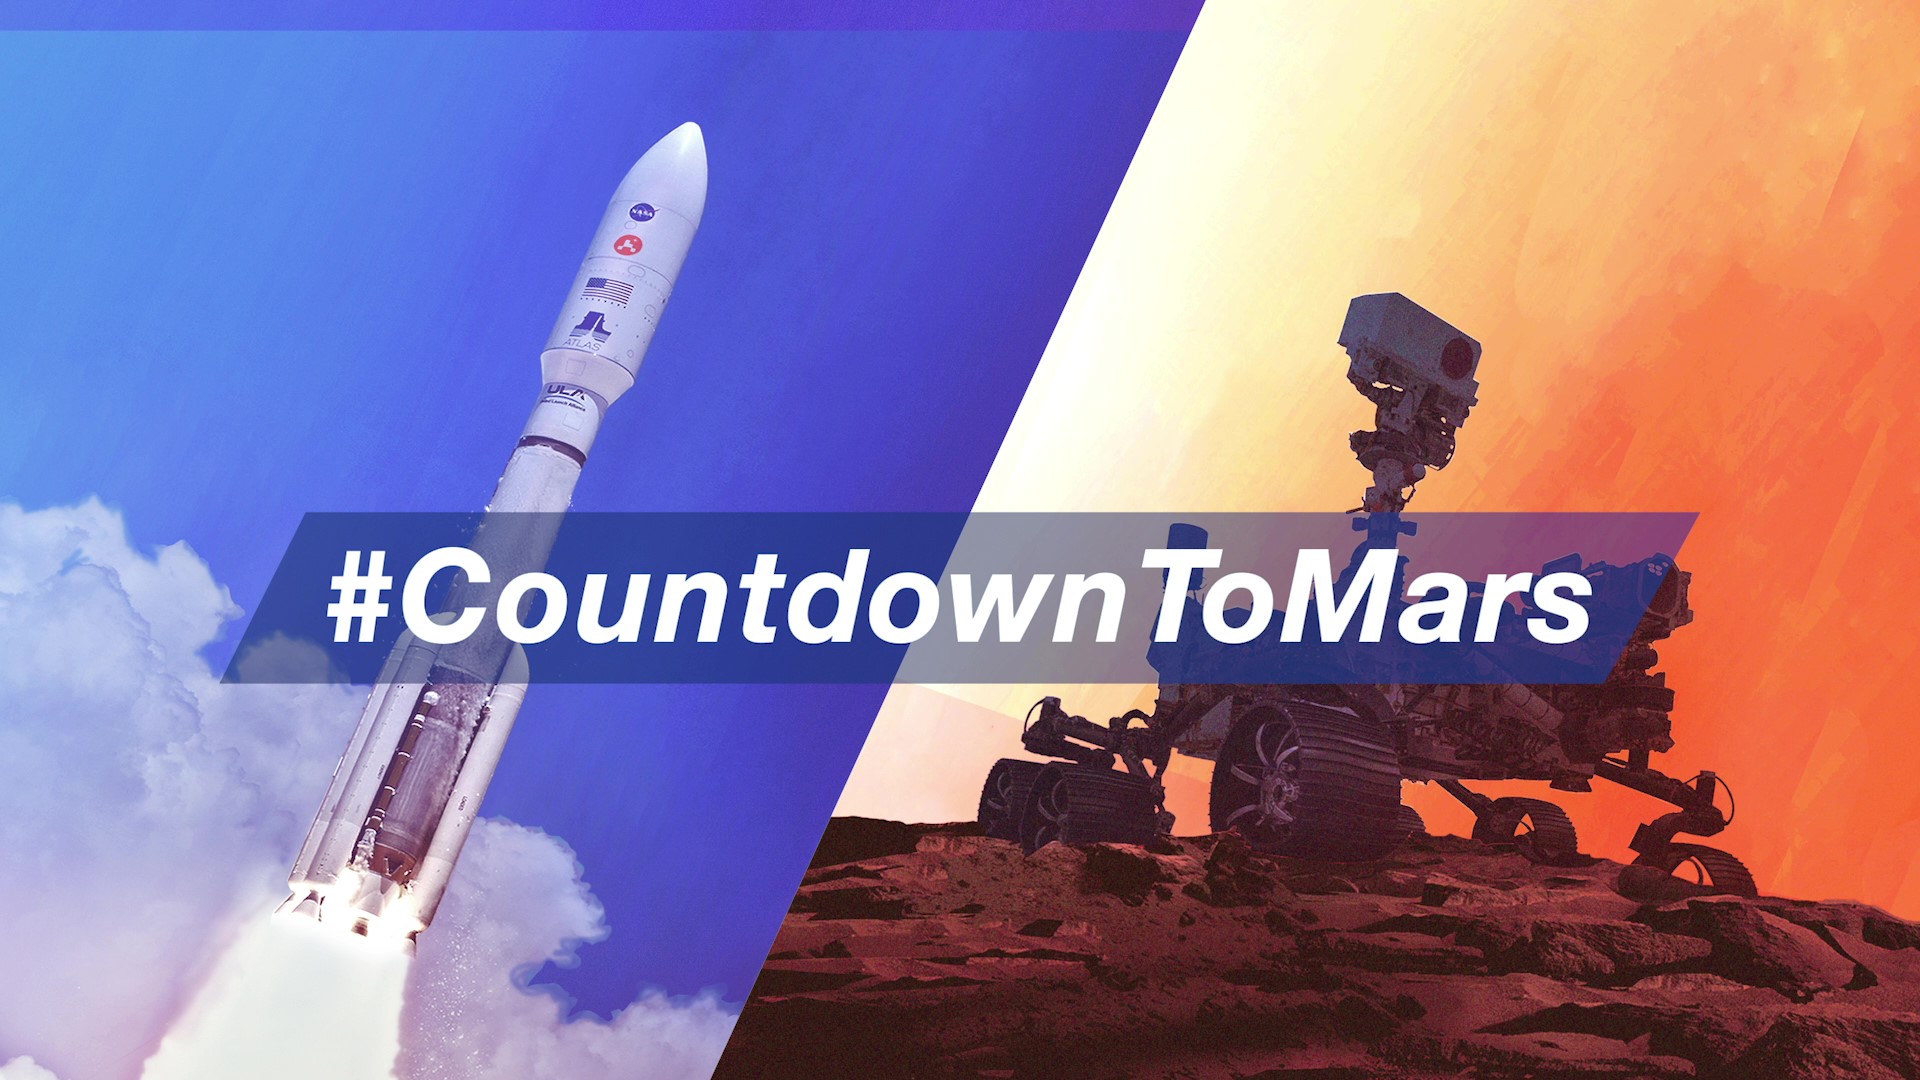 Watch video for NASA's Perseverance Mars Rover Launches With Your #CountdownToMars